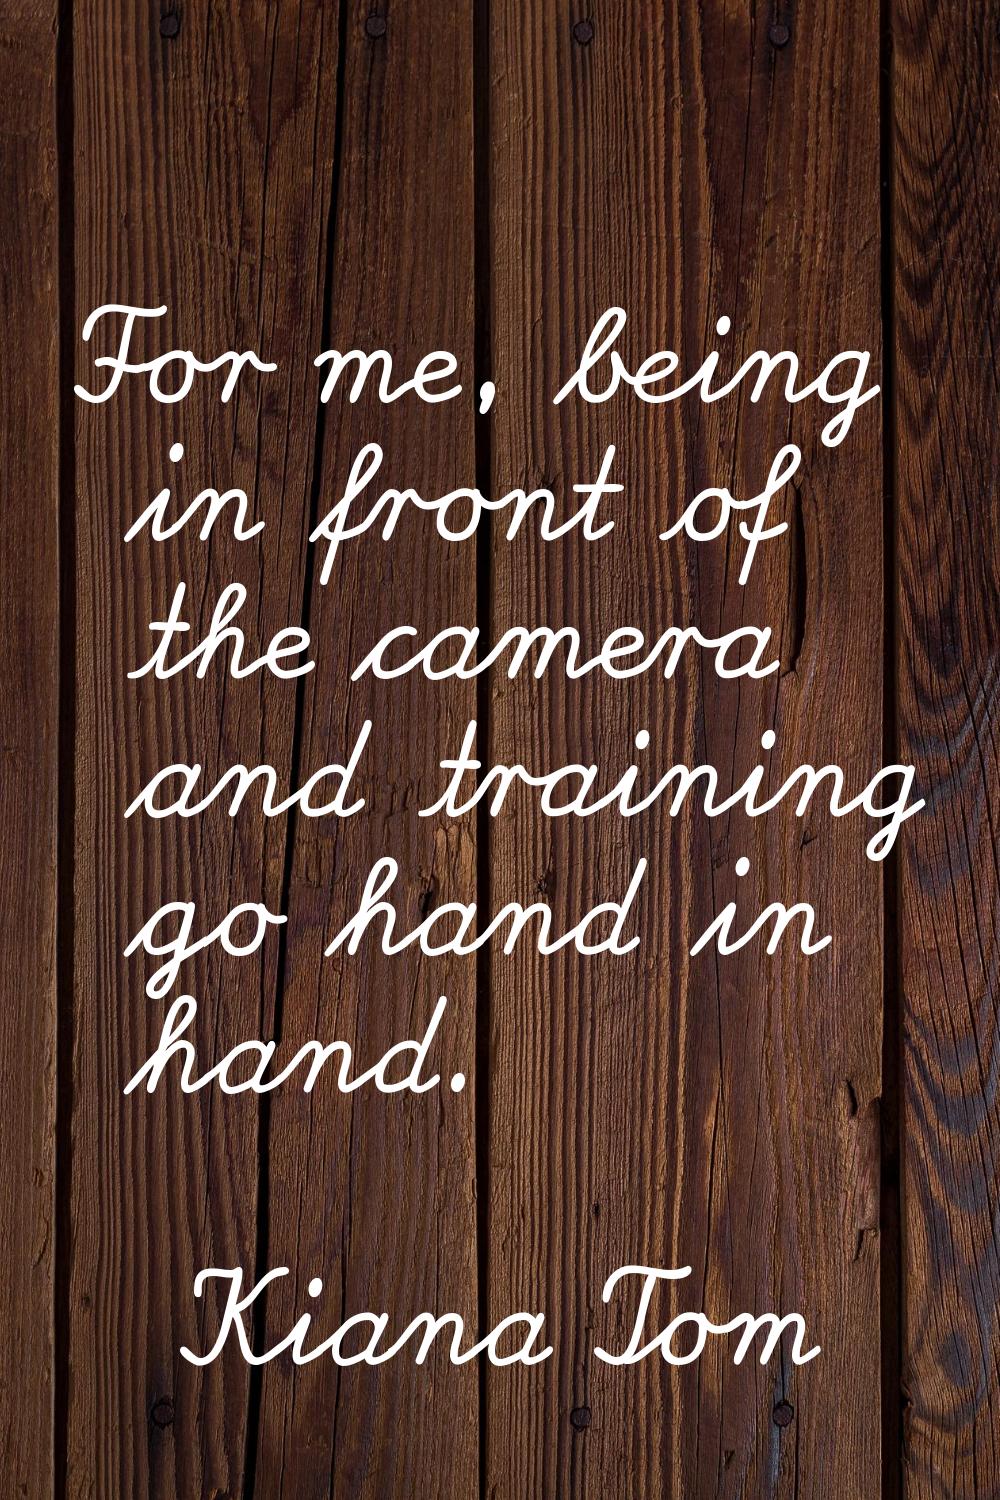 For me, being in front of the camera and training go hand in hand.